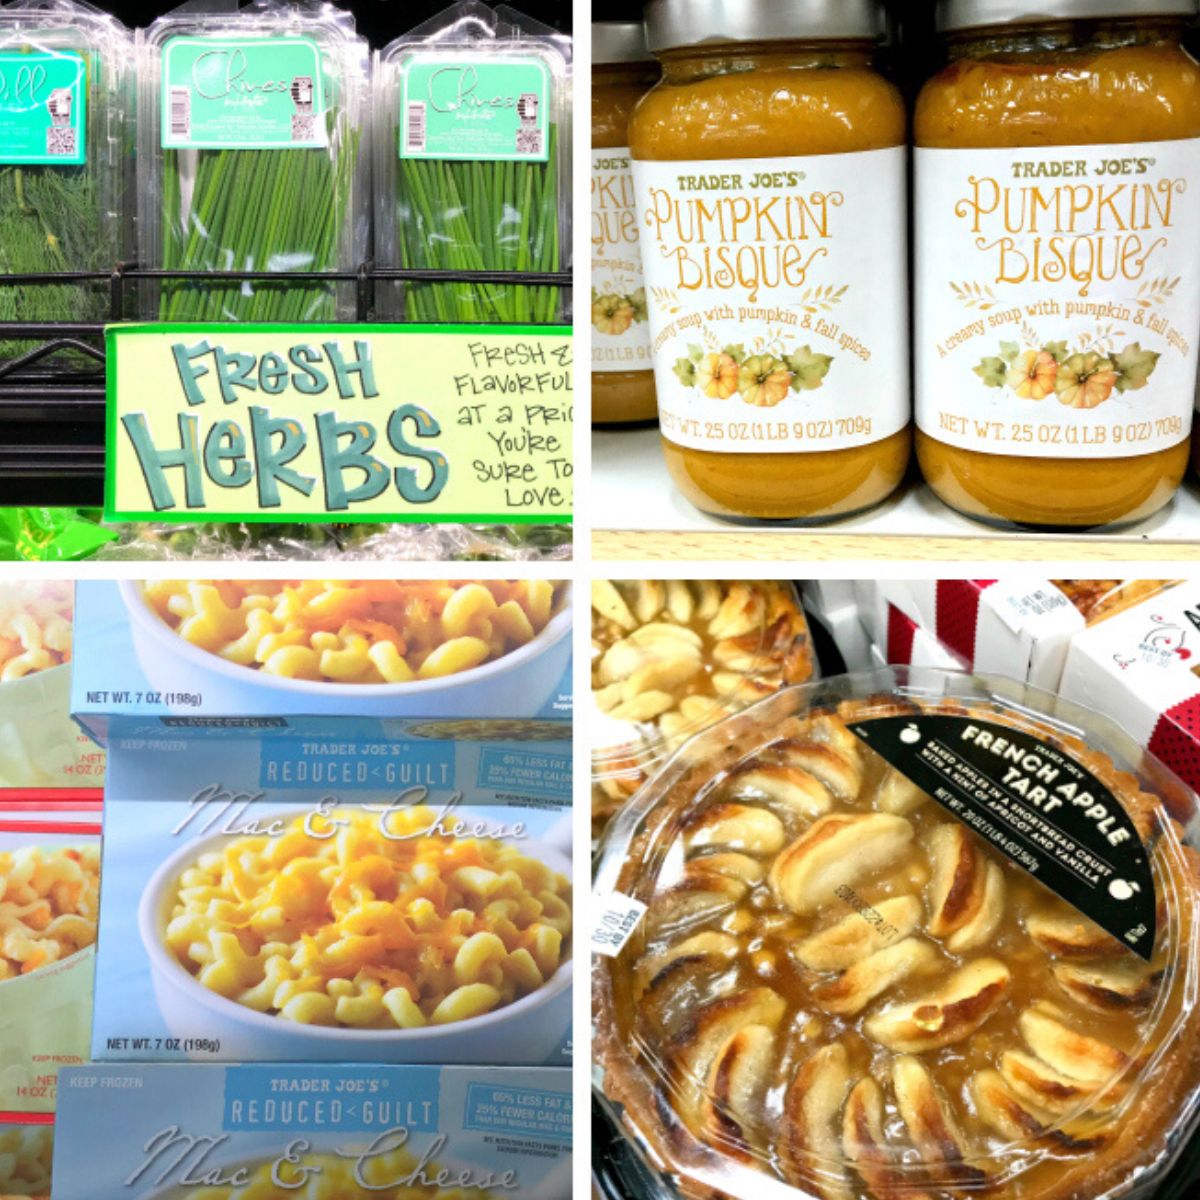 The photo collage shows Trader Joe's items including a package of fresh herbs, a jar of pumpkin bisque, a box of frozen mac and cheese, and a french apple tart.